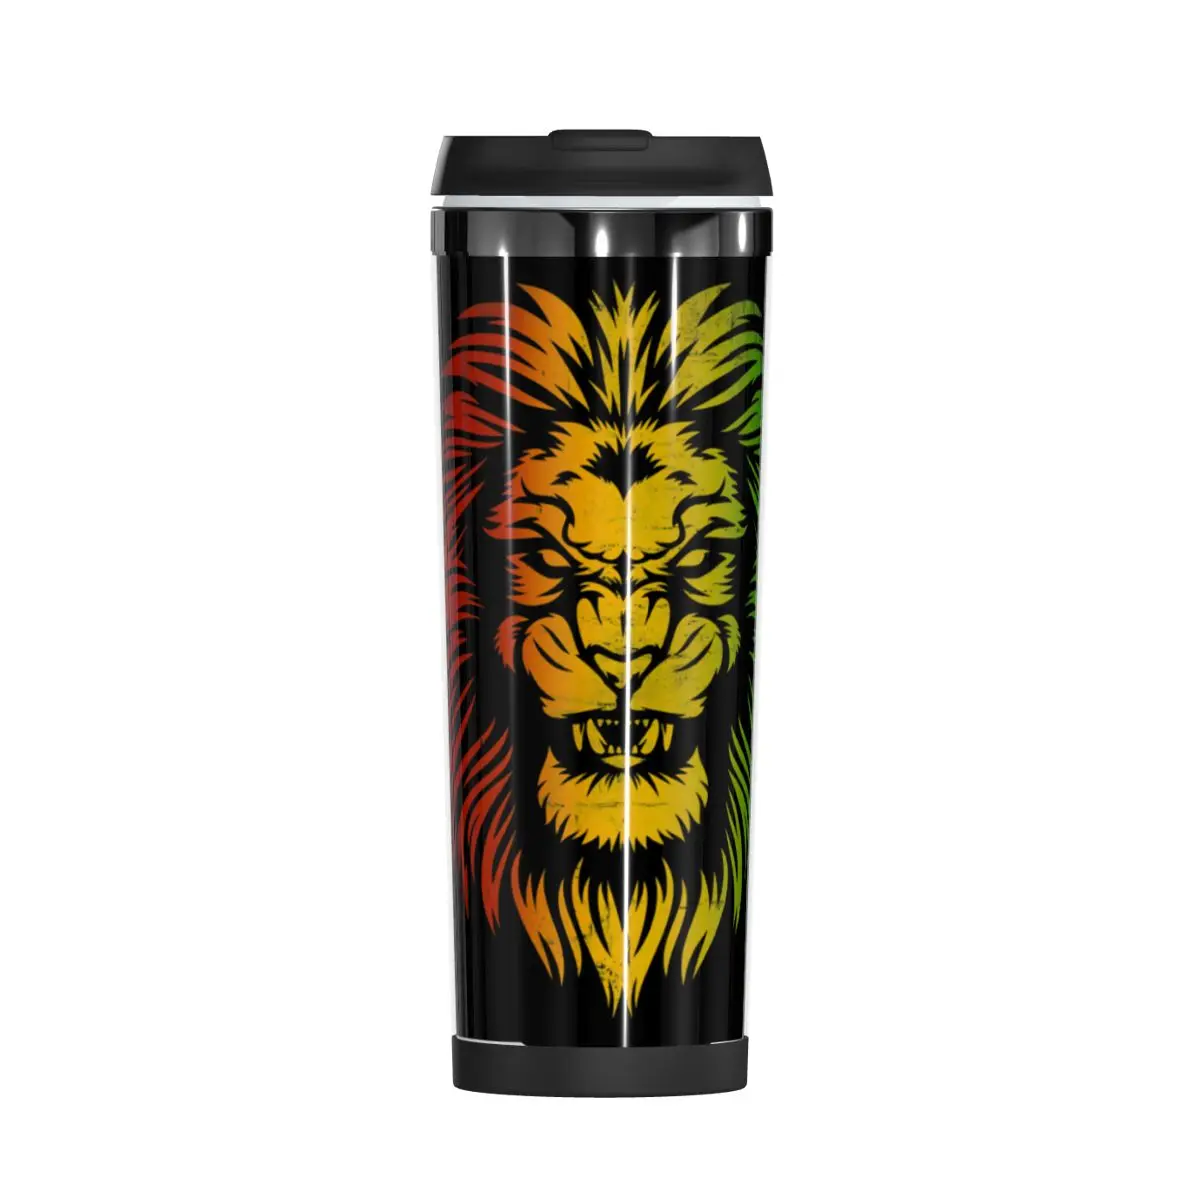 

Lion Of Judah Rasta Reggae Essential Double Insulated Water Cup Novelty Thermos flask Mug Heat Insulation multi-function cups